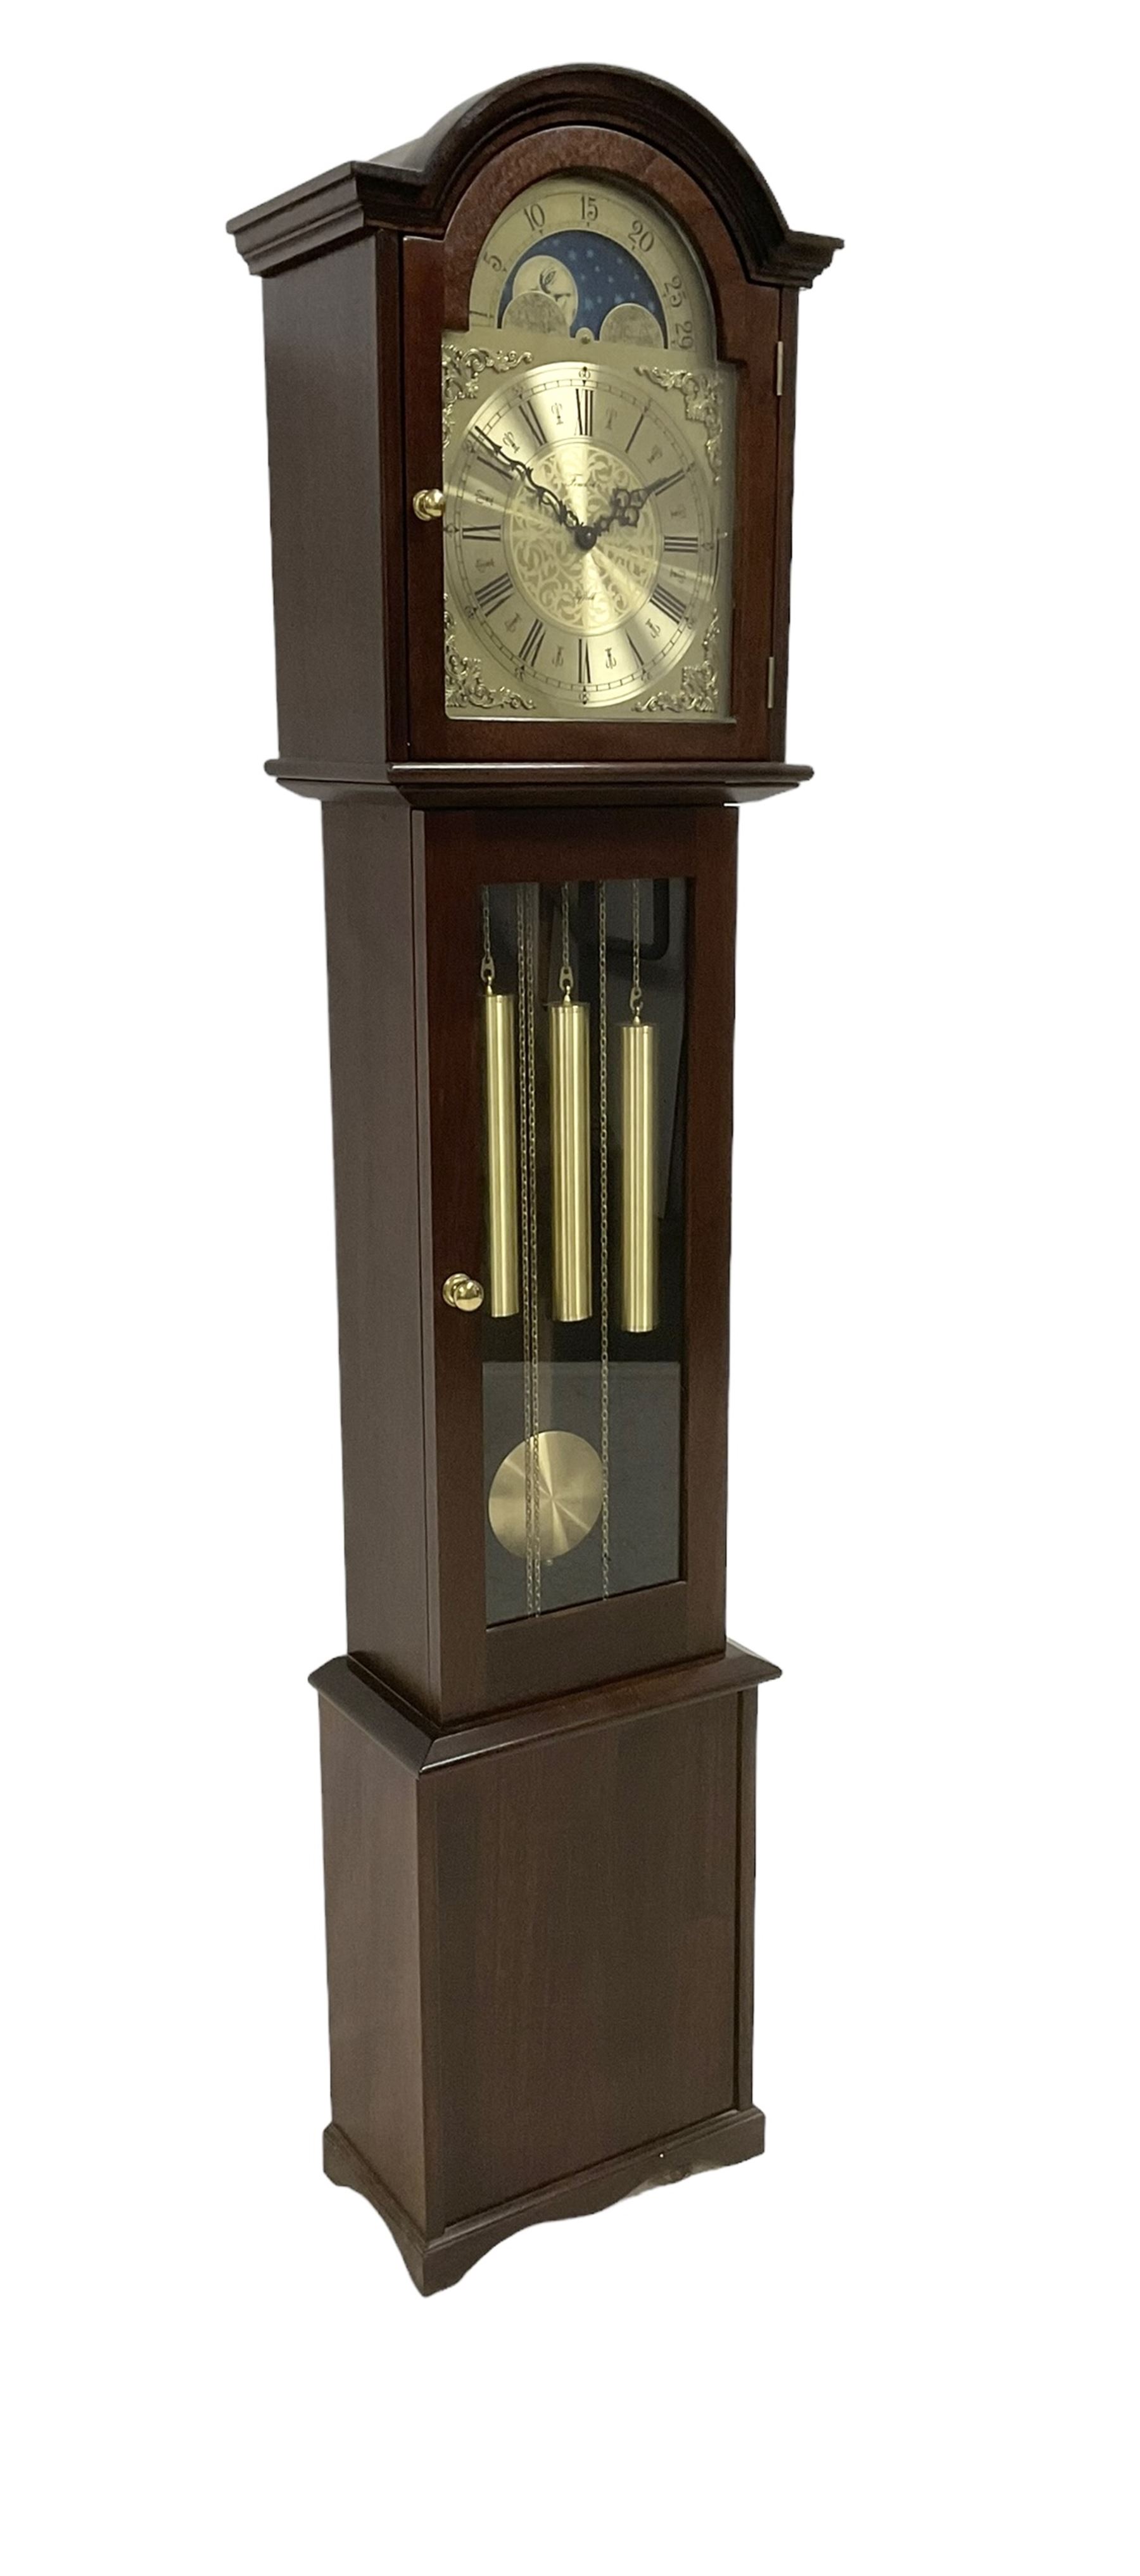 20th century - weight driven 8-day mahogany grandmother clock with a swans neck pediment and fully g